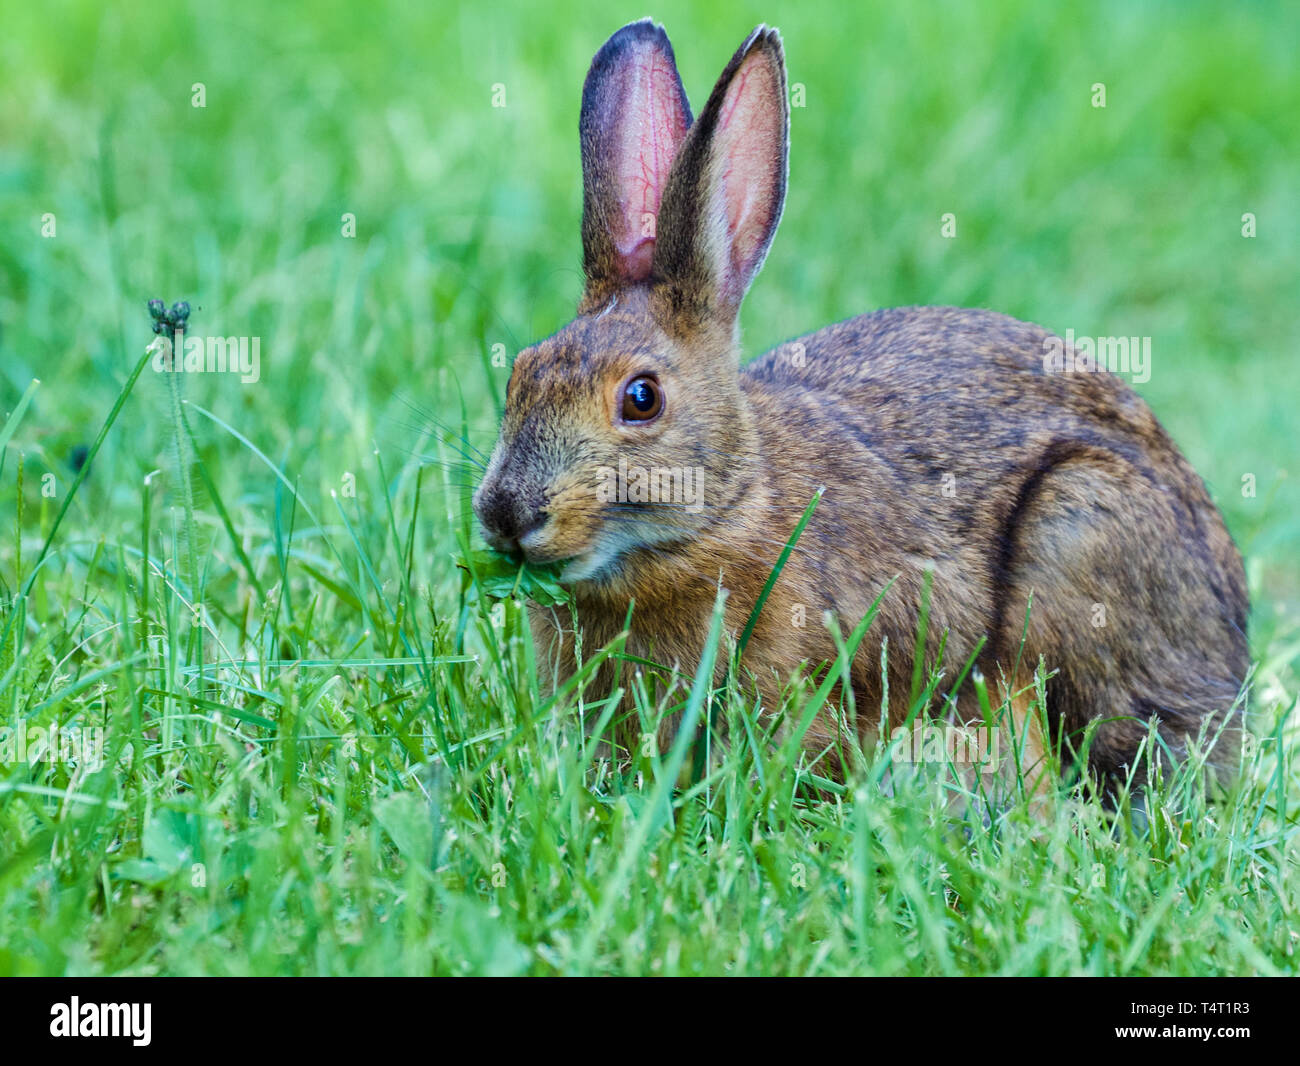 Side profile of a wide-eyed wild rabbit chewing on a leaf in the middle of a grassy field. Stock Photo